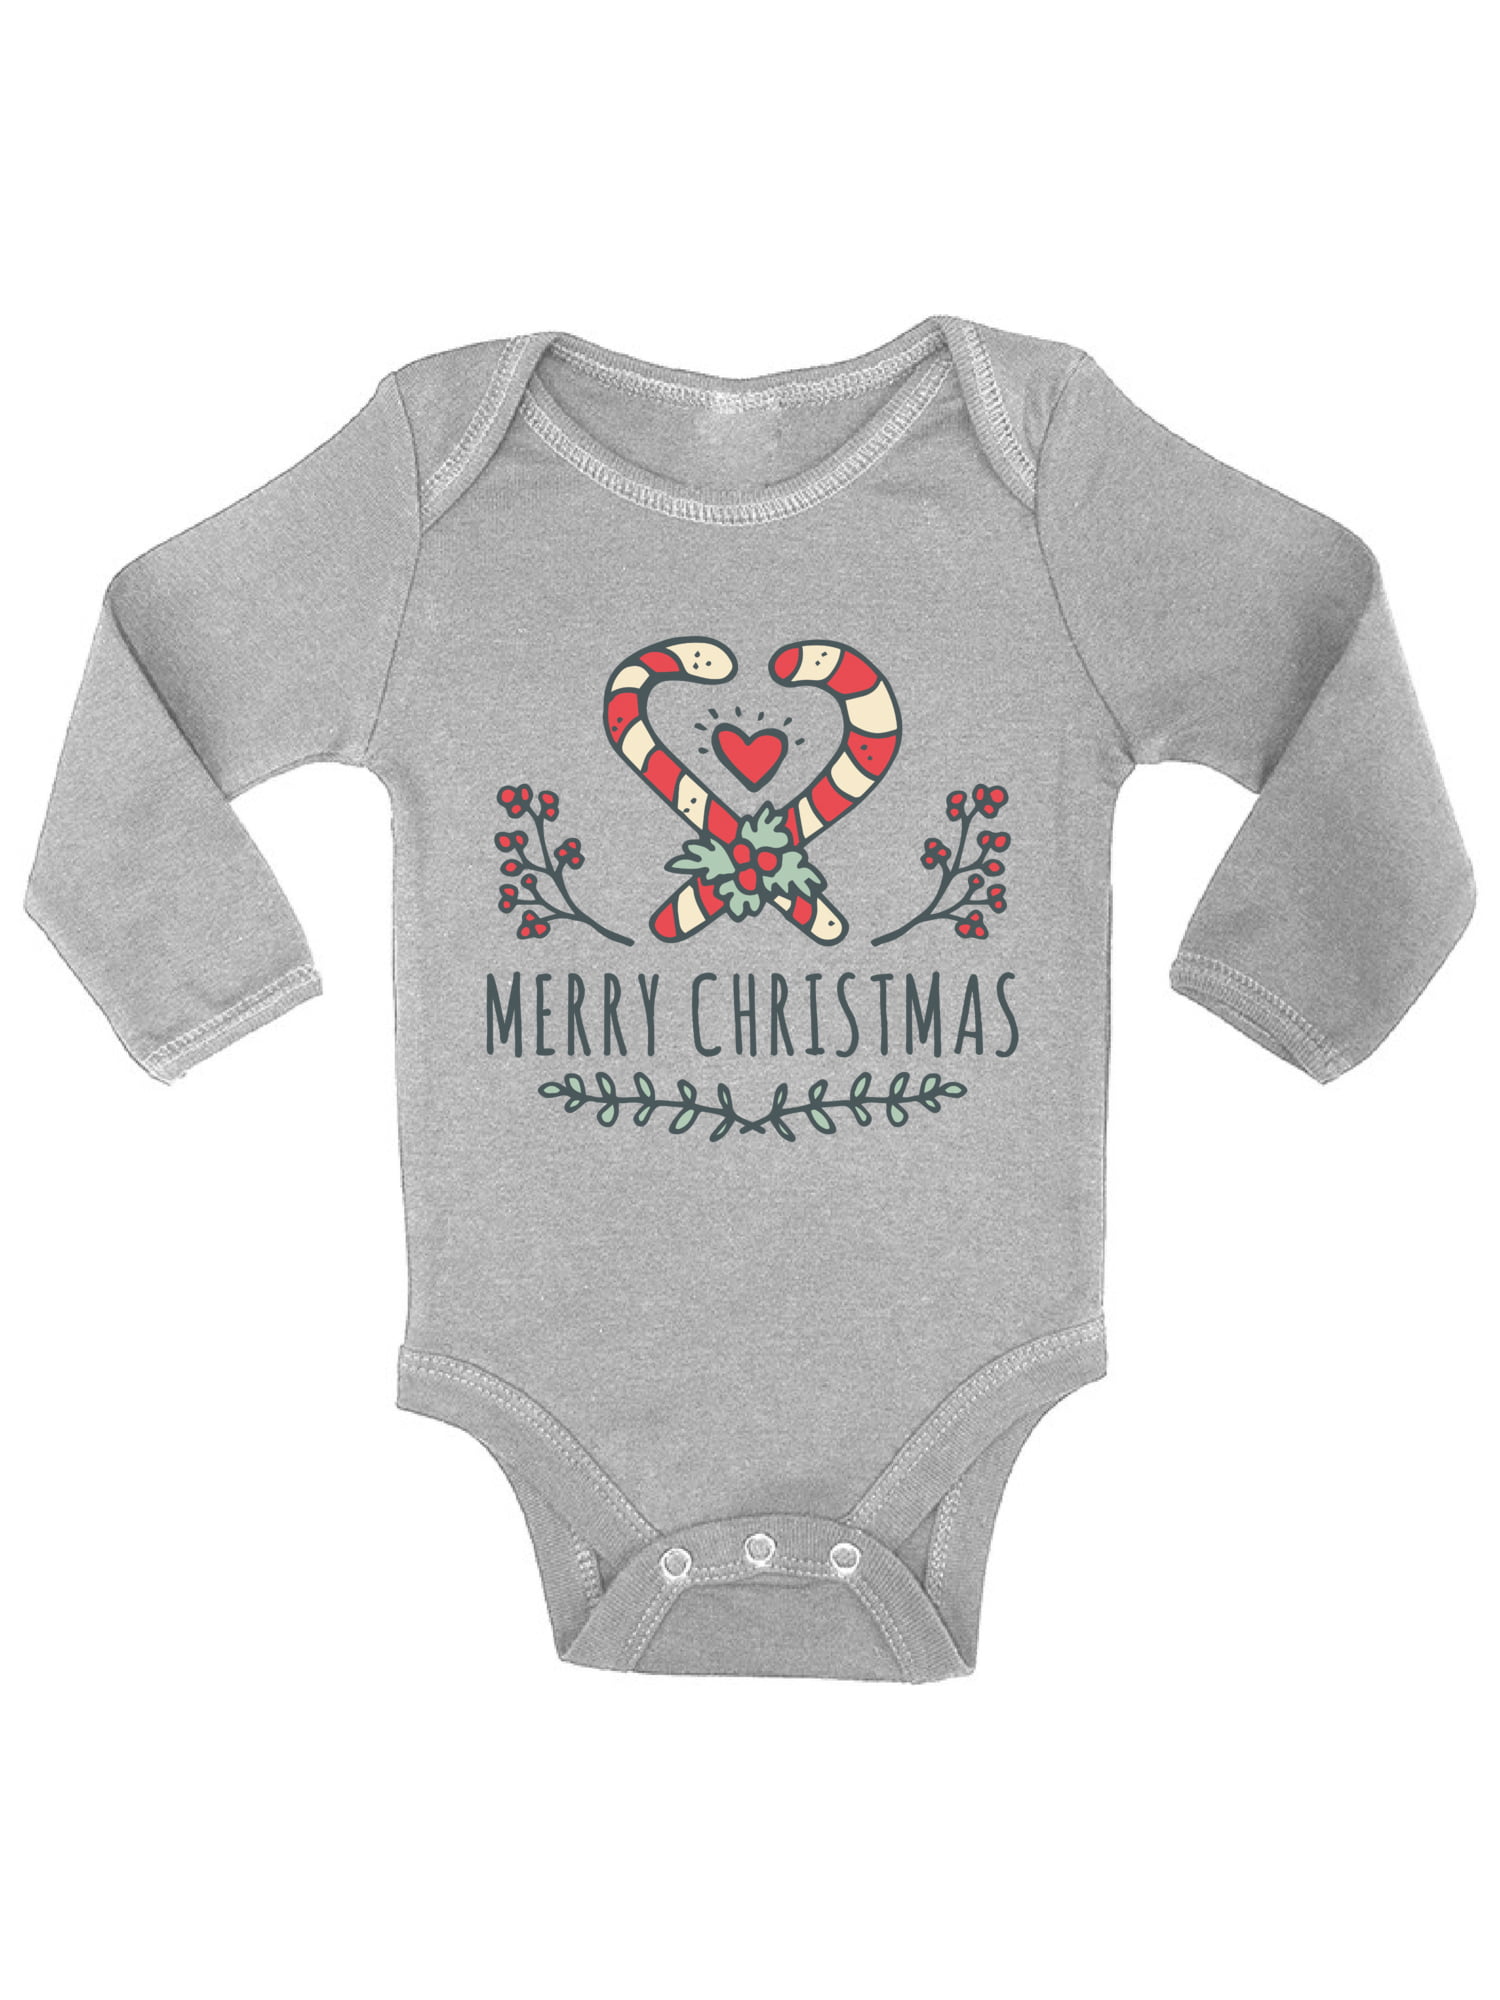 Awkward Styles Ugly Christmas Baby Outfit Bodysuit Xmas Candy Baby Romper